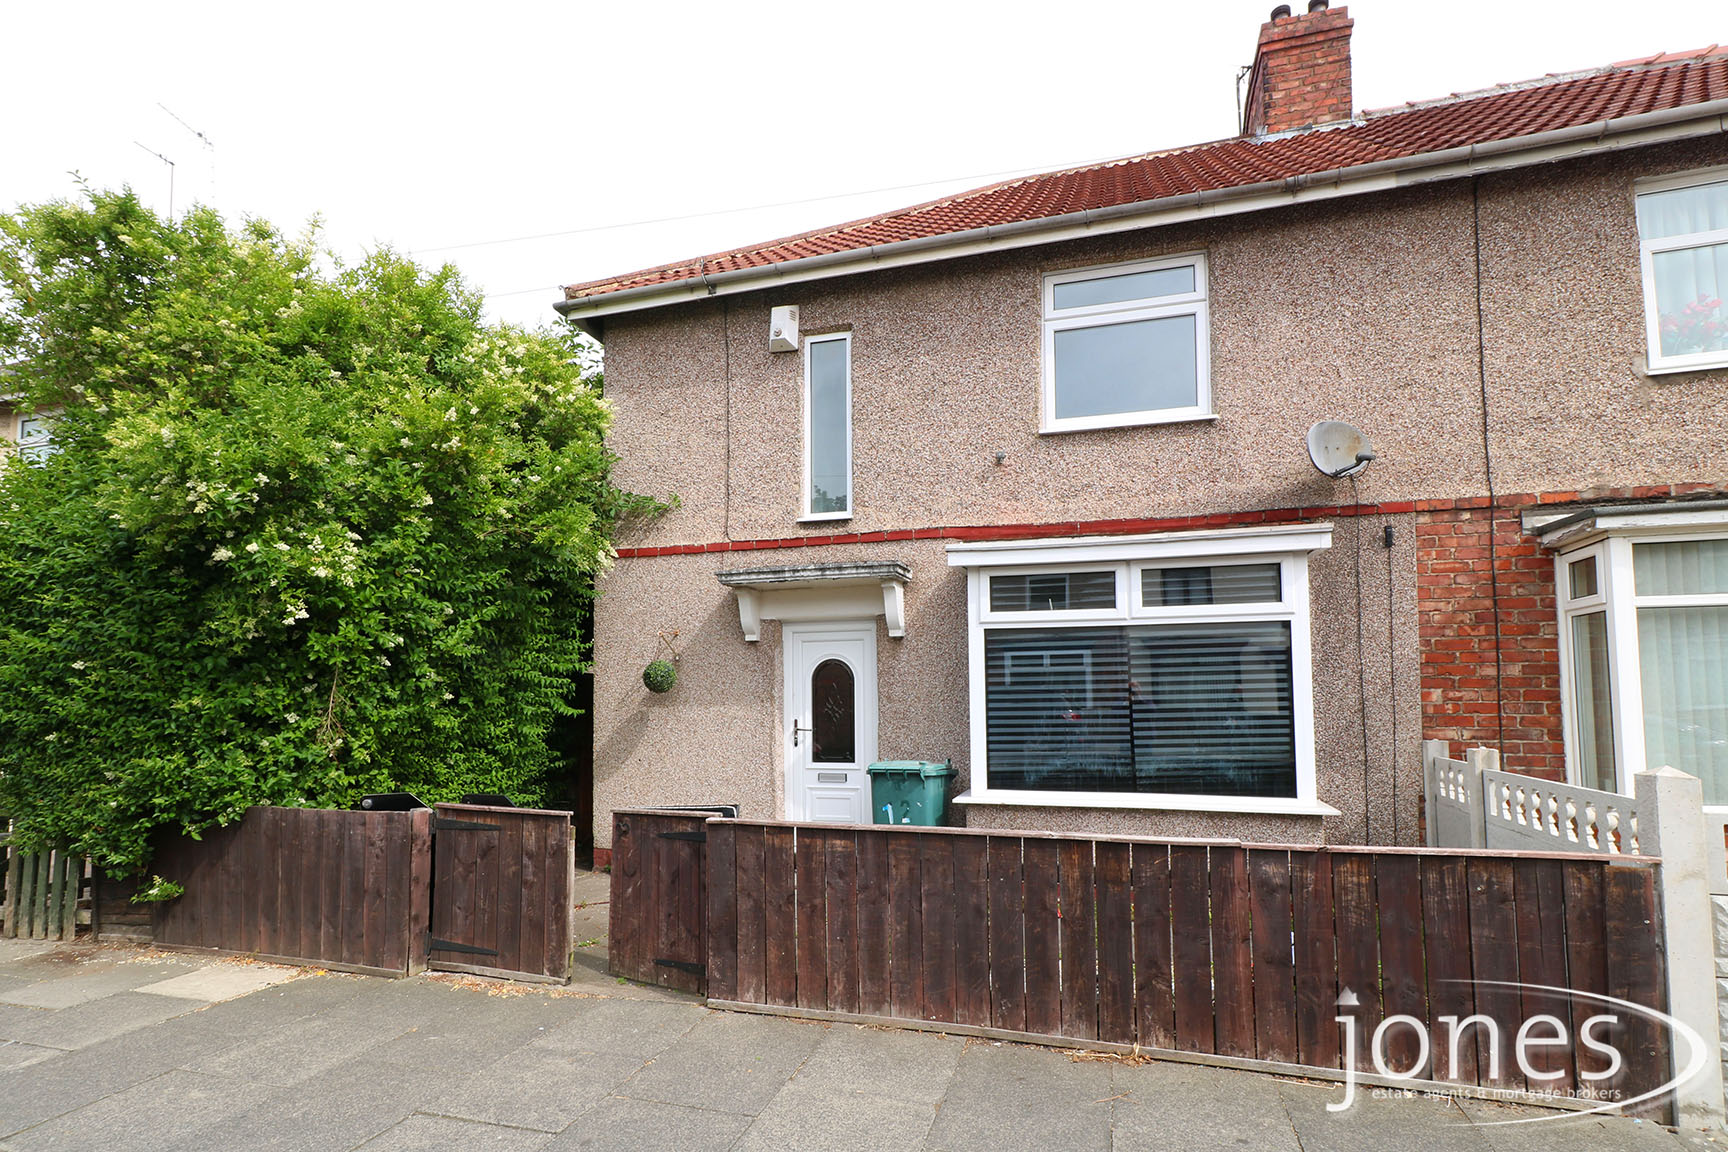 Home for Sale Let - Photo 01 Leven Road, Norton, Stockton on Tees, TS20 1DB